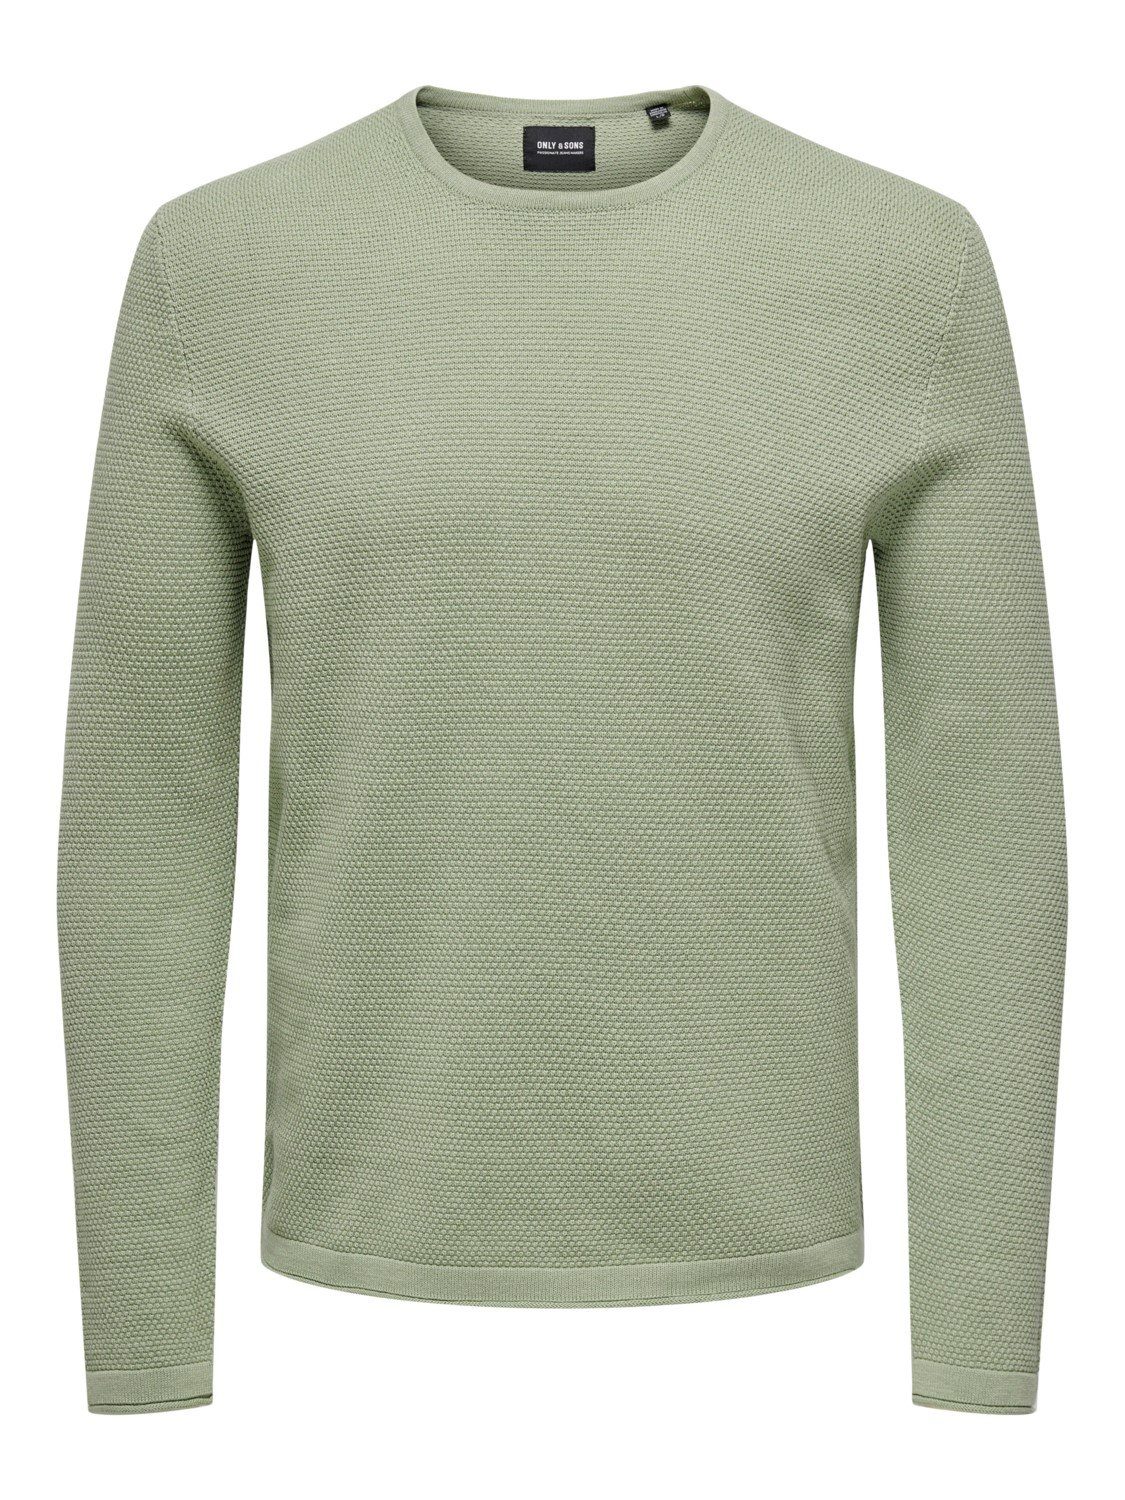 ONLY & SONS Strickpullover Dünner Langarm Strickpullover Rundhals Basic Sweater ONSPANTER 4421 in Mint